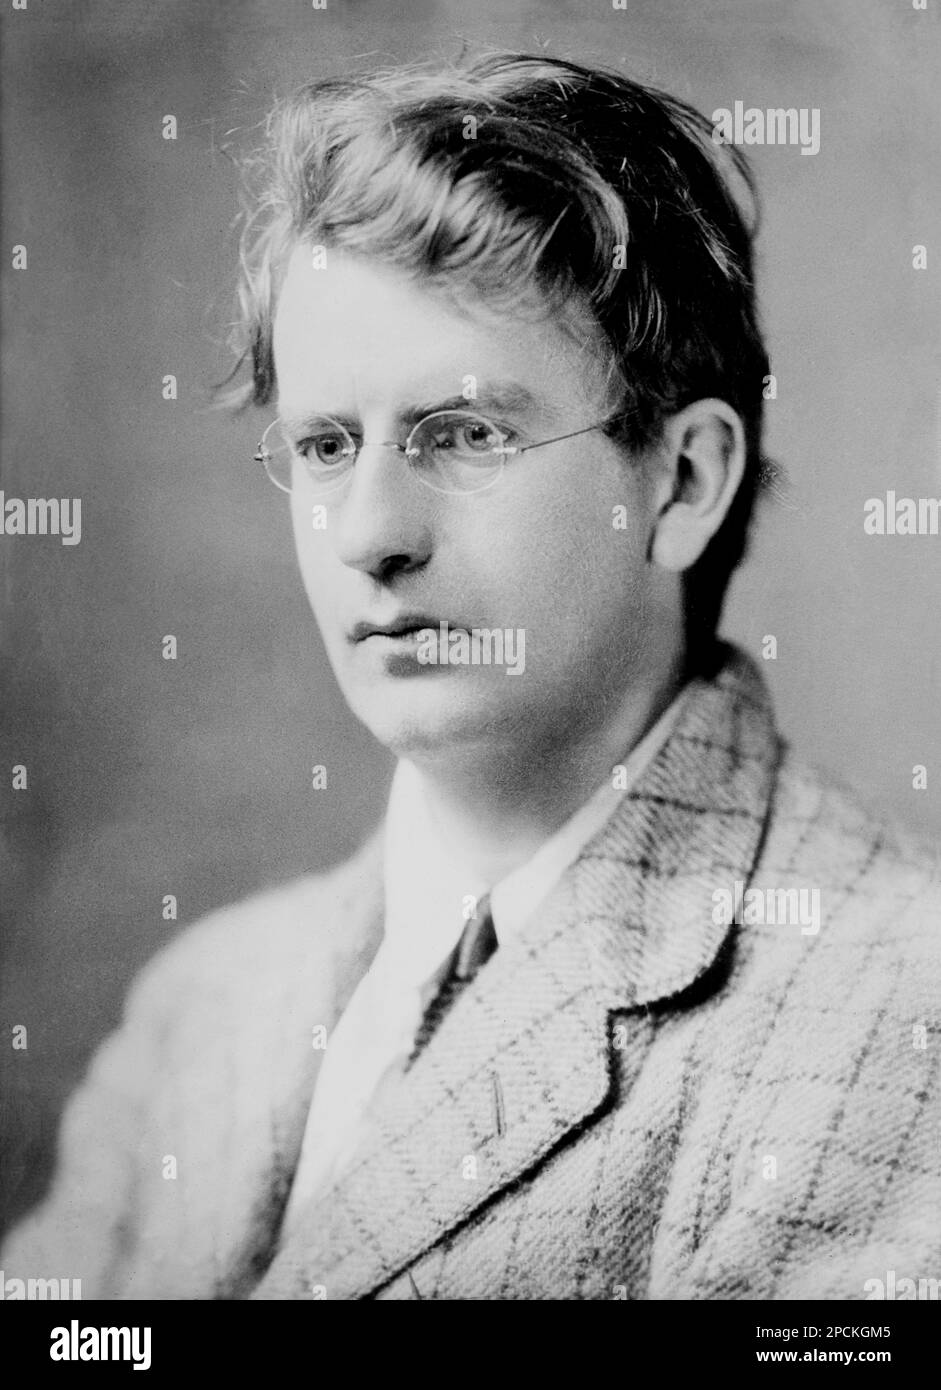 1920 ca , GREAT BRITAIN : The scotish engineer and inventor of the world's first working television system, also the world's first fully electronic colour television broadcast JOHN LOGIE BAIRD (  1888 -  1946 ). Although Baird's electromechanical system was eventually displaced by purely electronic systems (such as those of Vladimir Zworykin and Philo Farnsworth ), his early successes demonstrating working television broadcasts and his colour and cinema television work earn him a prominent place in television's invention . - foto storiche - foto storica  - scienziato - scientist  - portrait - Stock Photo